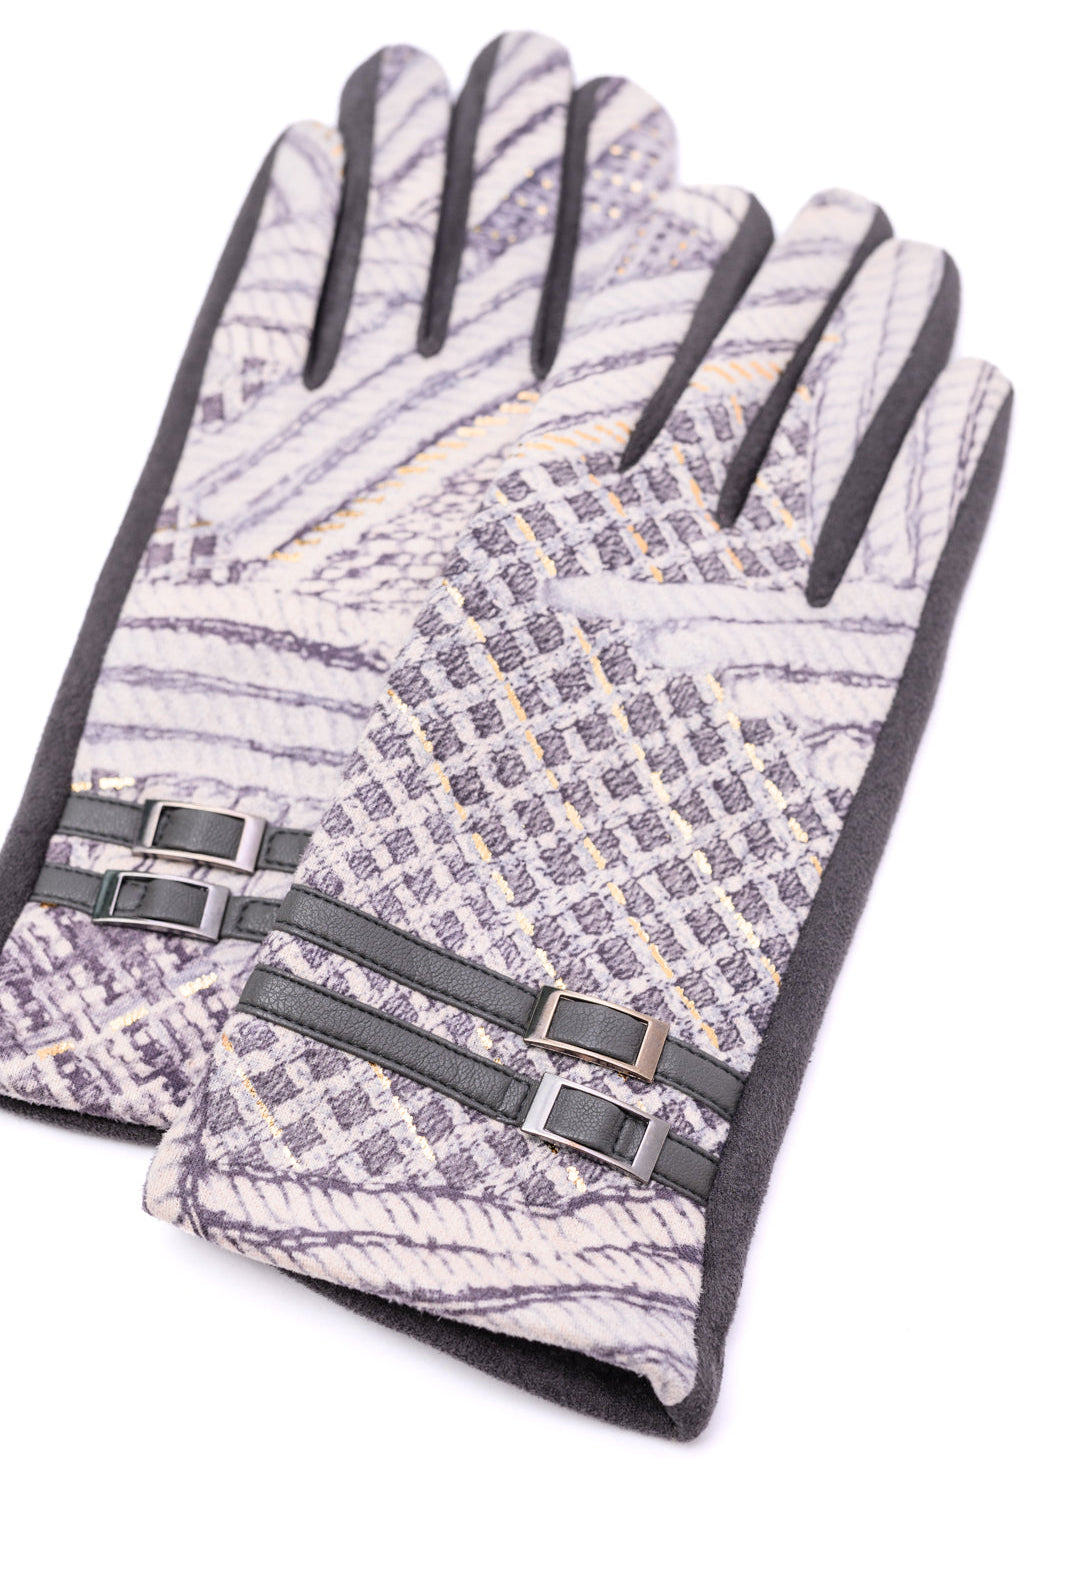 Textured and Buckled Gloves-Accessories- Simply Simpson's Boutique is a Women's Online Fashion Boutique Located in Jupiter, Florida